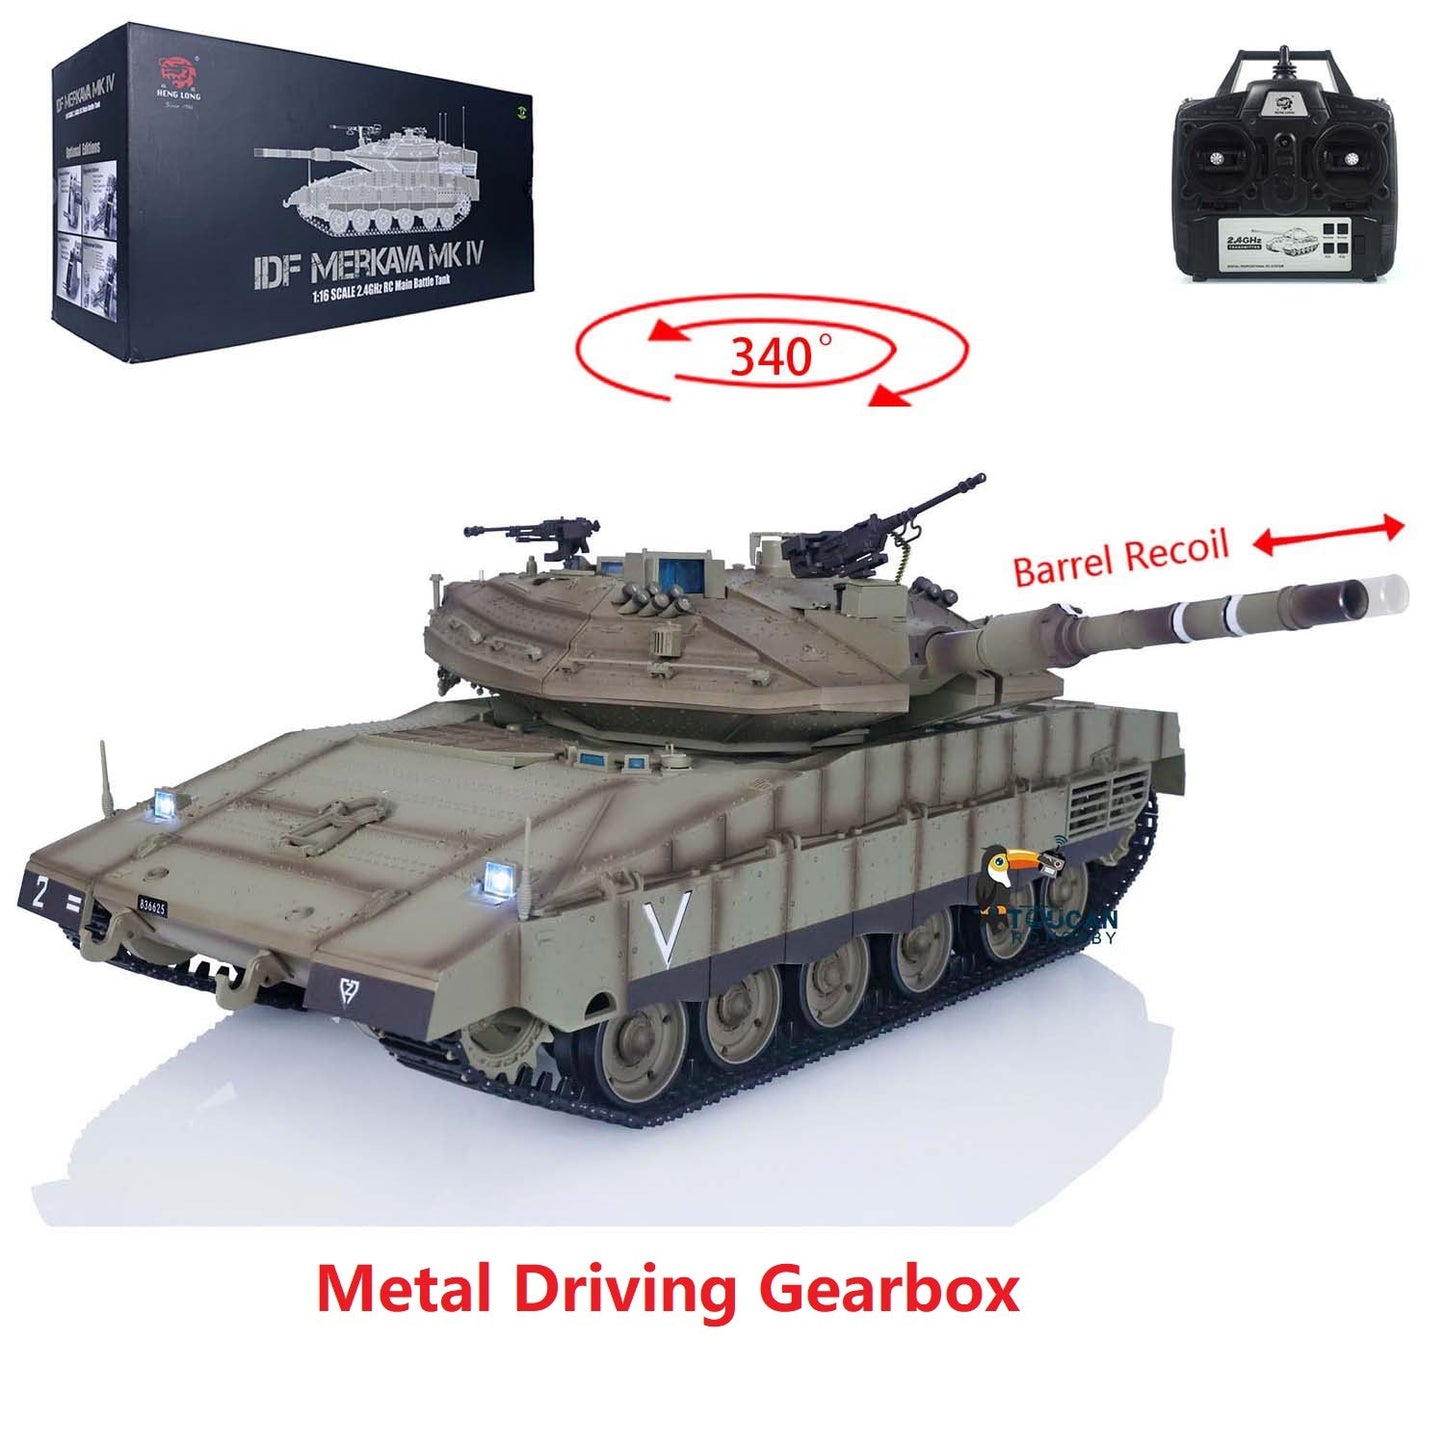 1:16 Scale 2.4GHz 7.0 3958 -1 RC Tank IDF Merkava MK IV Metal Driving Gearbox Steel Gears Military Tanks Collections Display